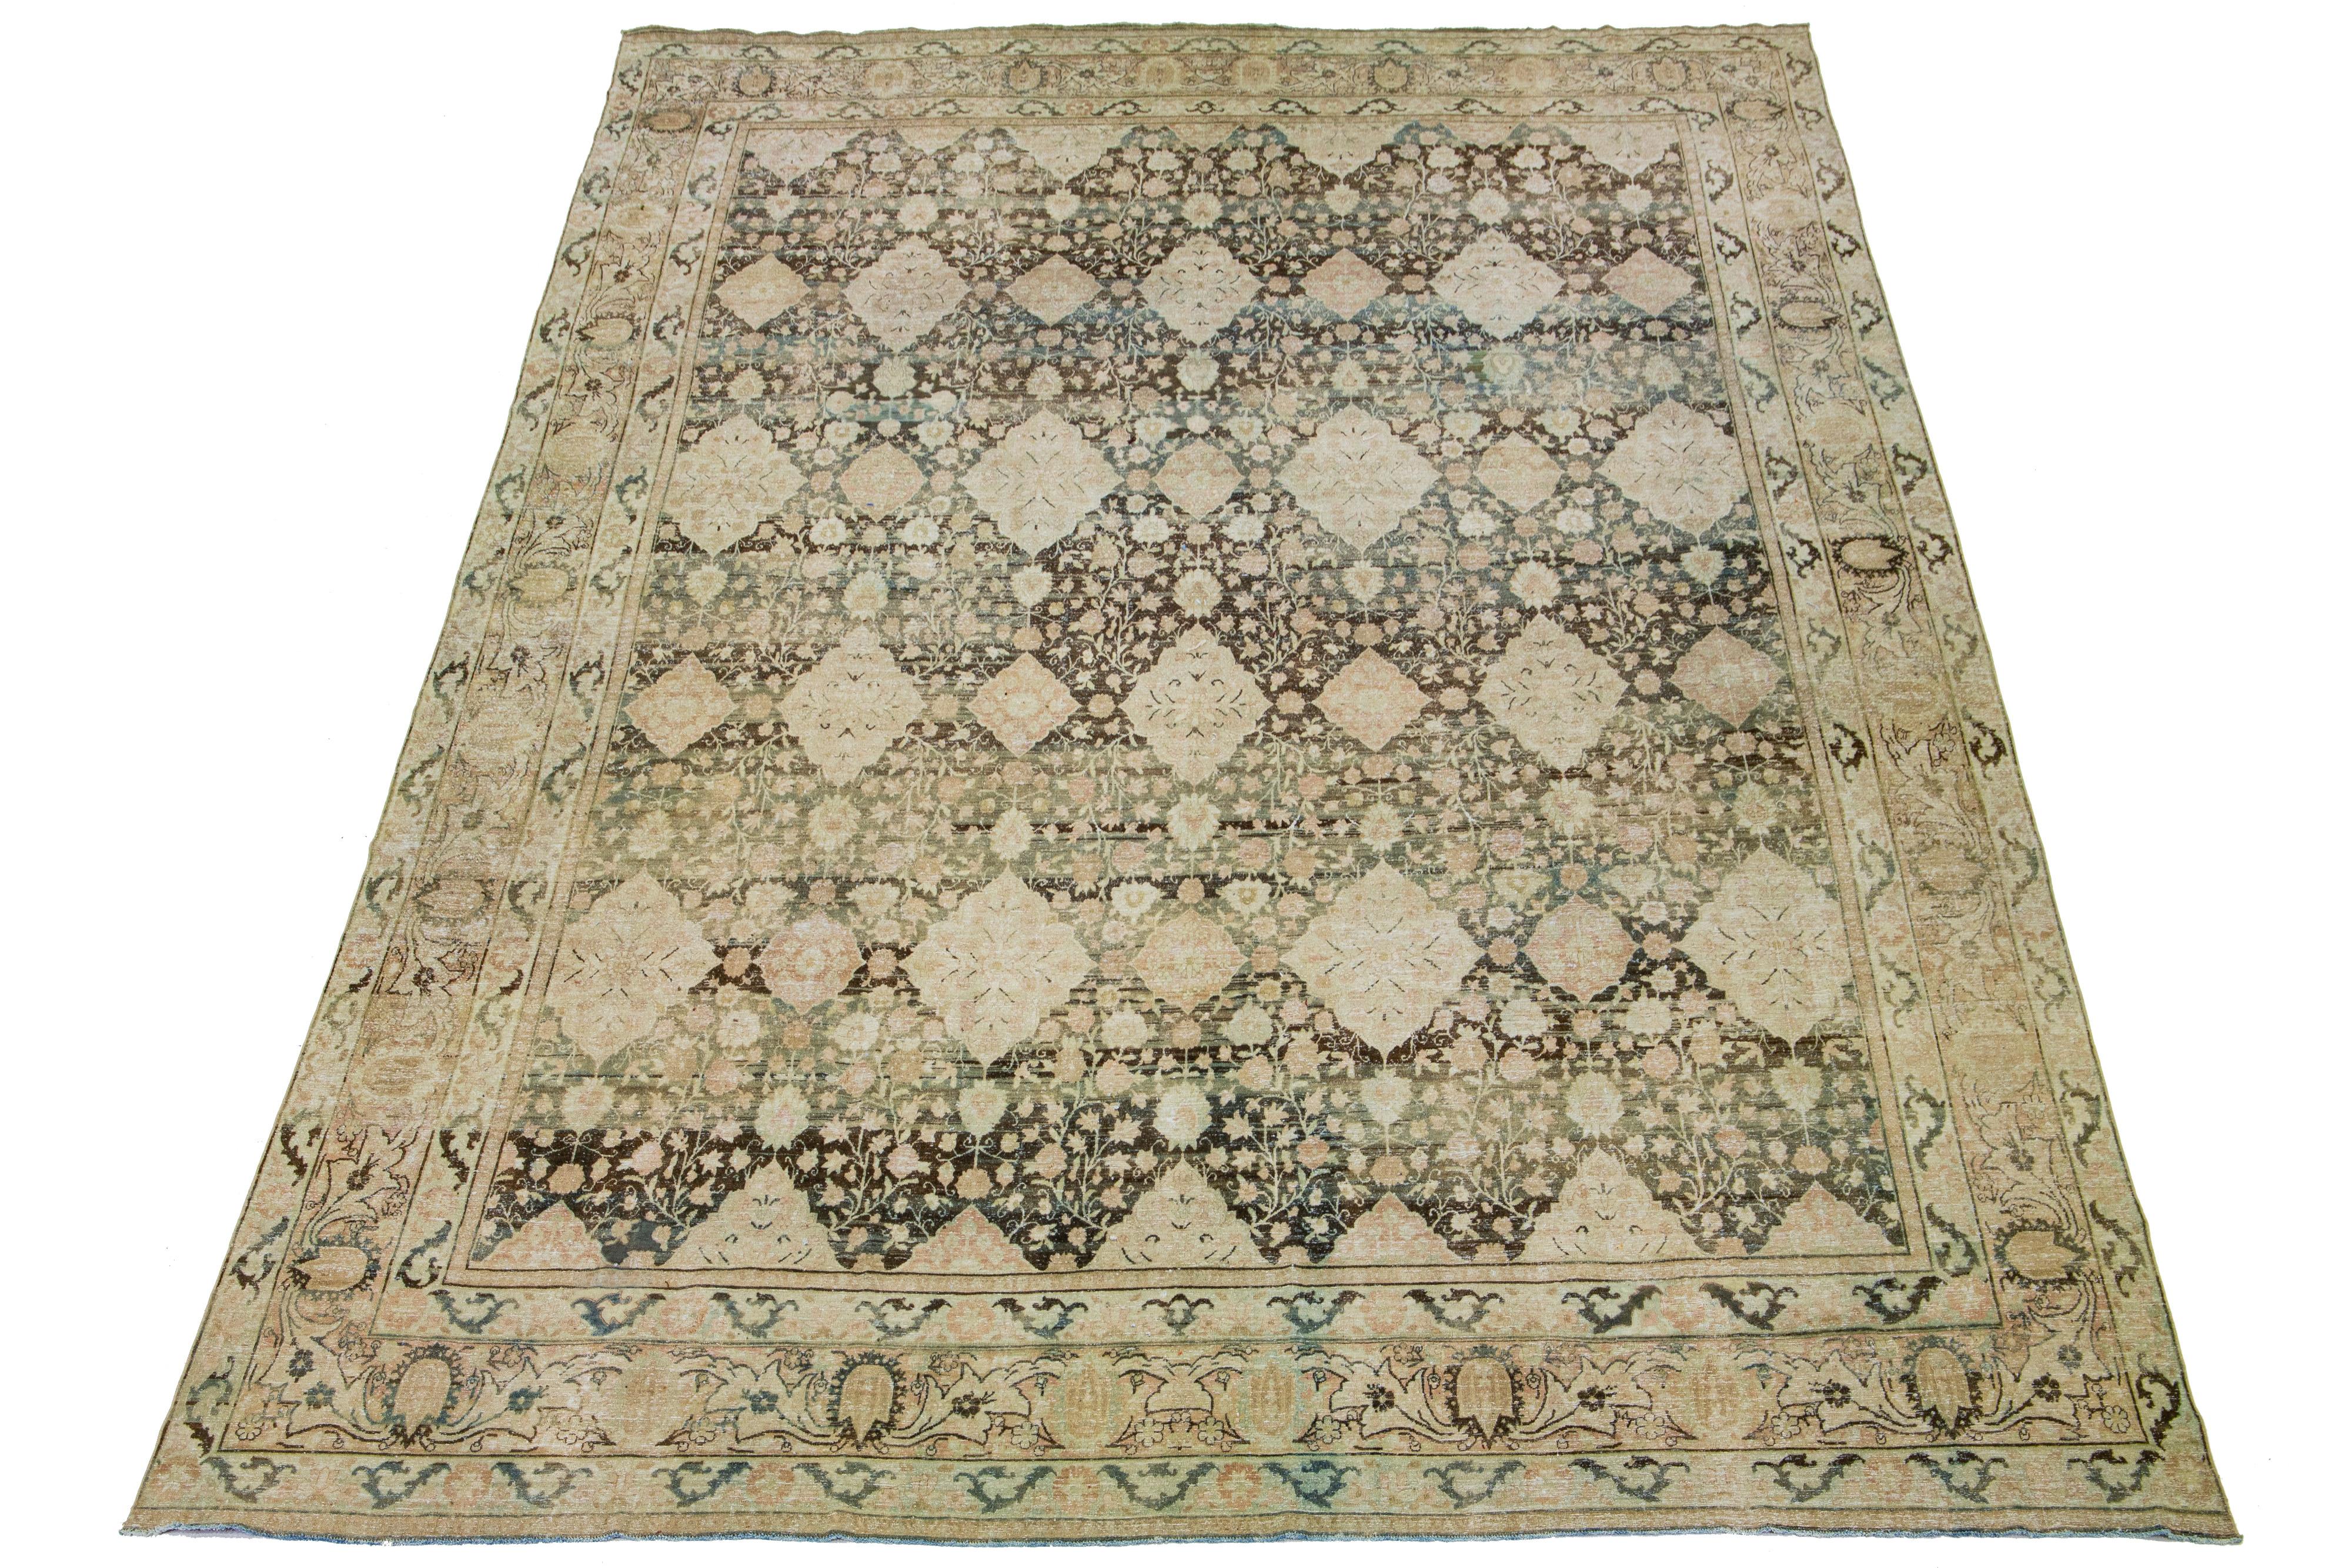 This exquisite wool rug from Kerman is hand-knotted and features a charming antique finish. The carpet has a warm brown color and a stunning all-over rosette pattern. Hints of rich blue and rust add beauty to this remarkable piece of Persian